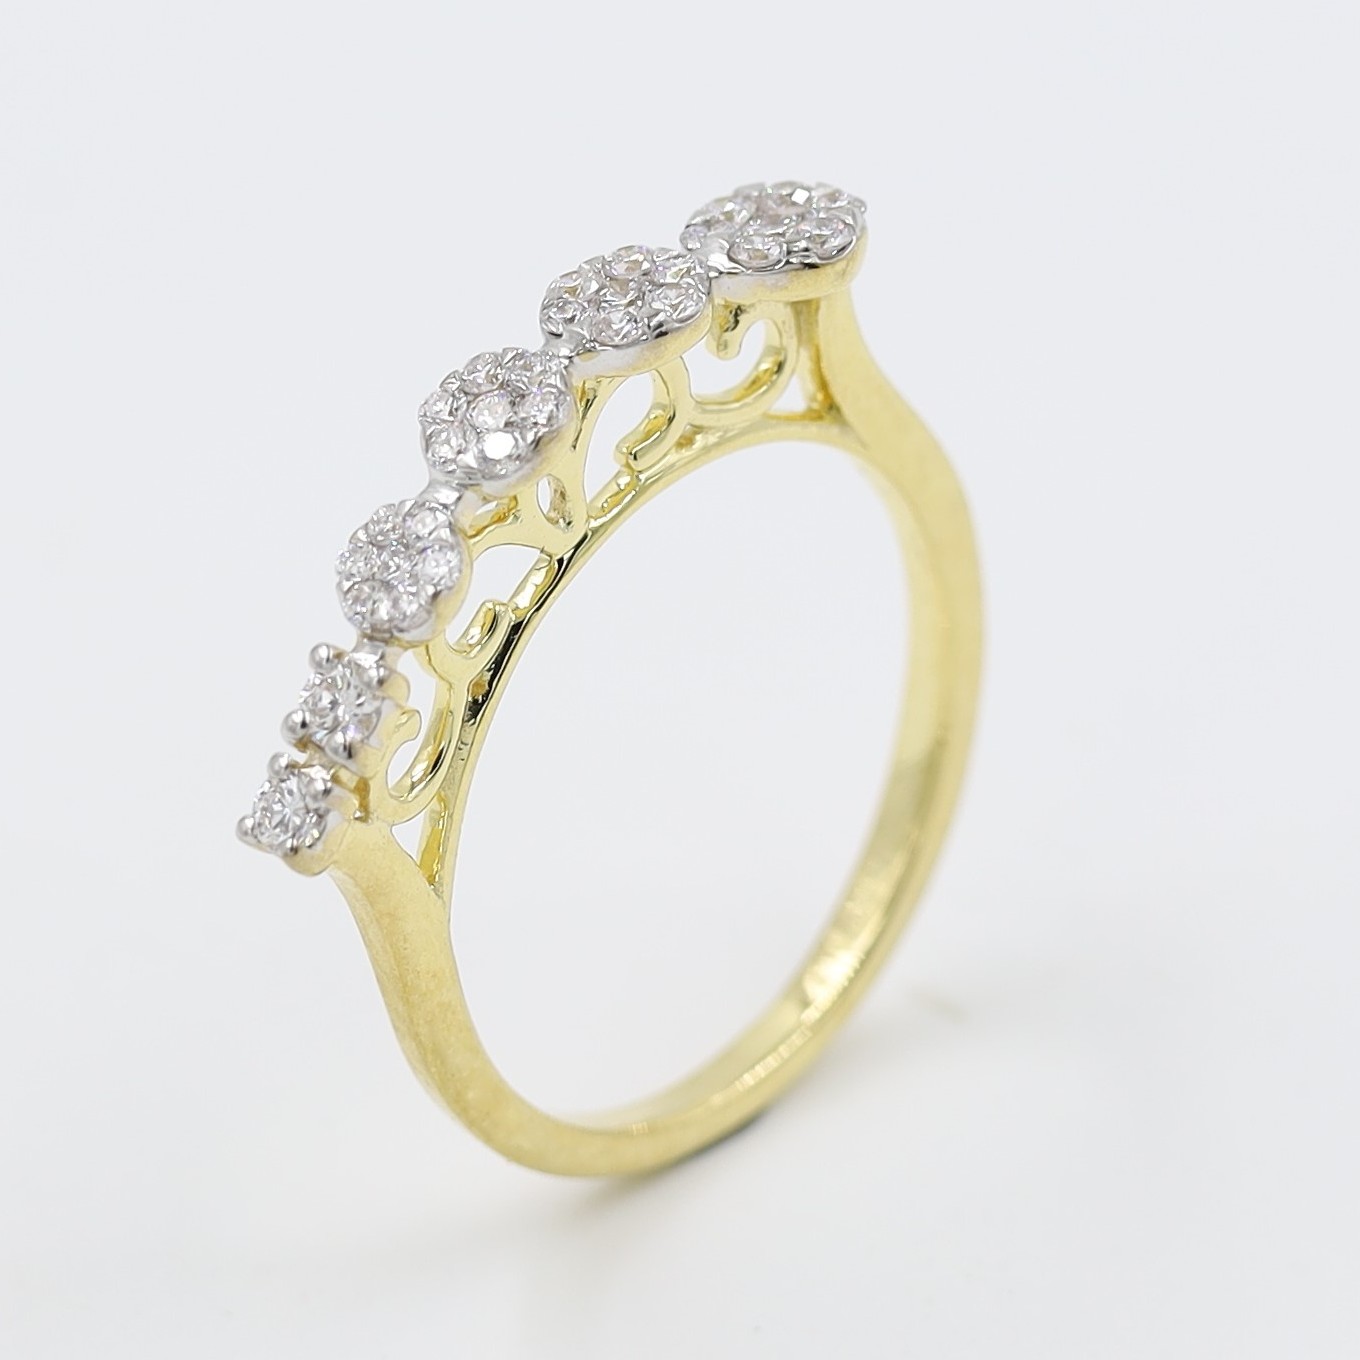 Charming Solitaire Look Gold And Diamond Ring